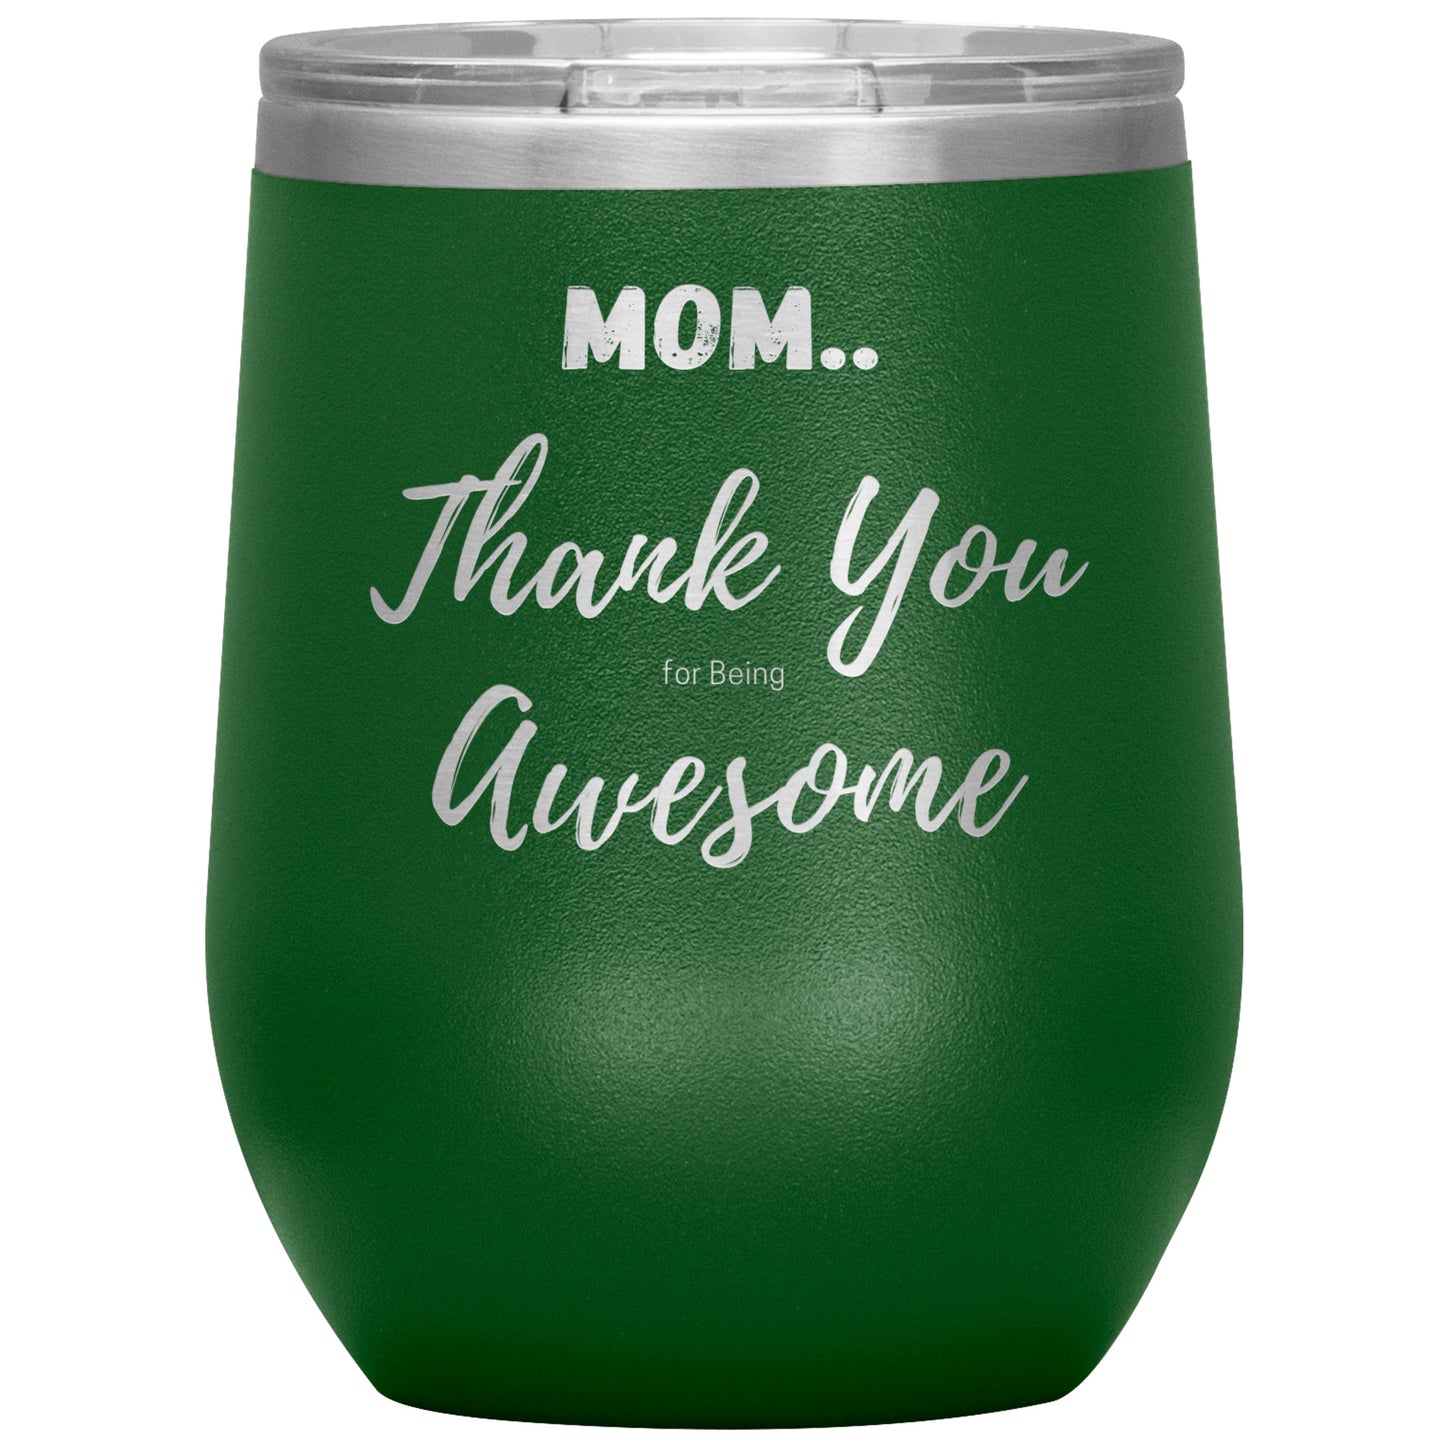 Mom Thank you for being awesome